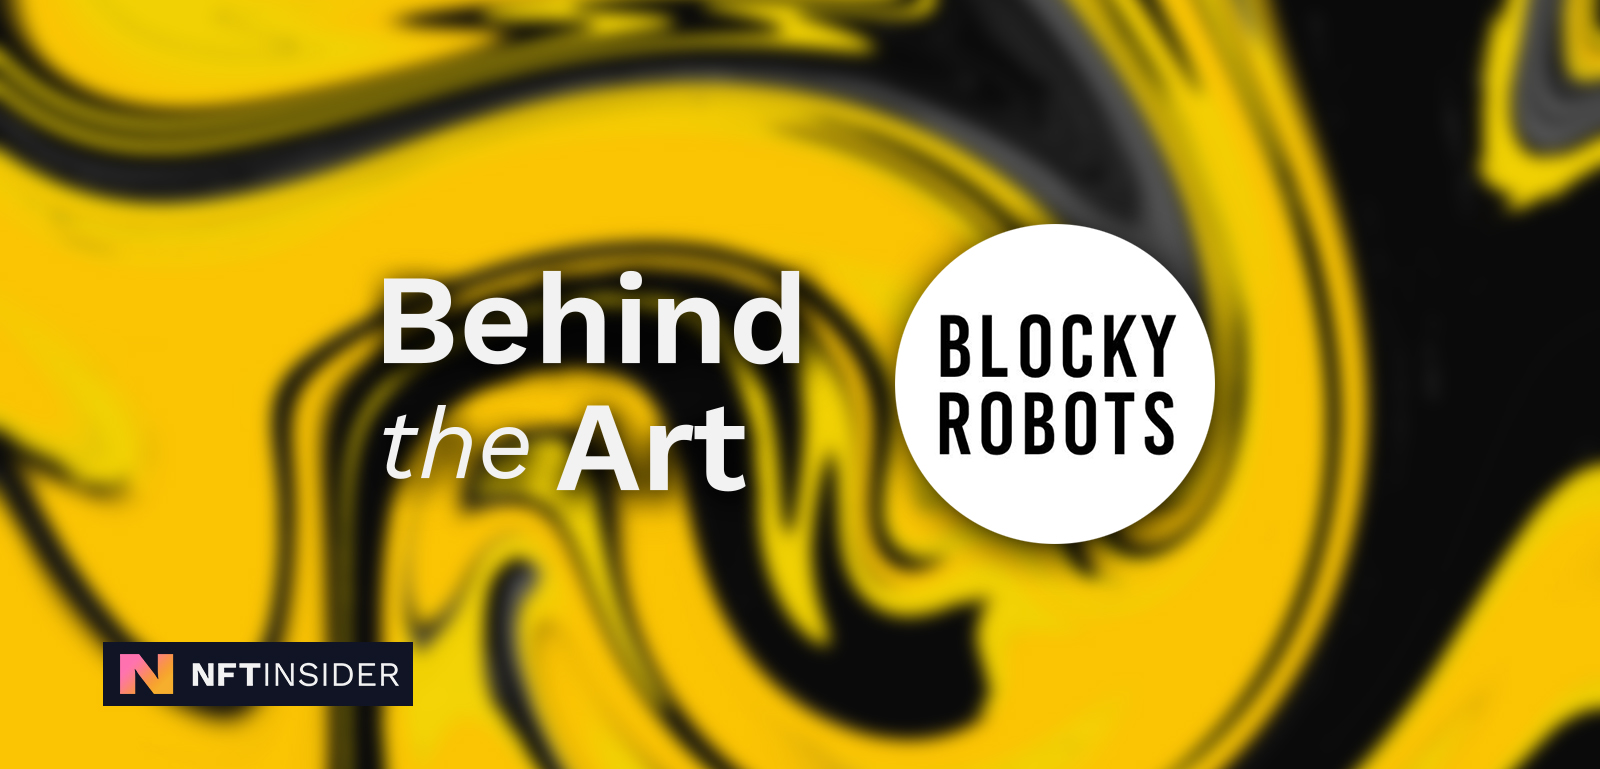 behind-the-art-blocky-robots-featured-image